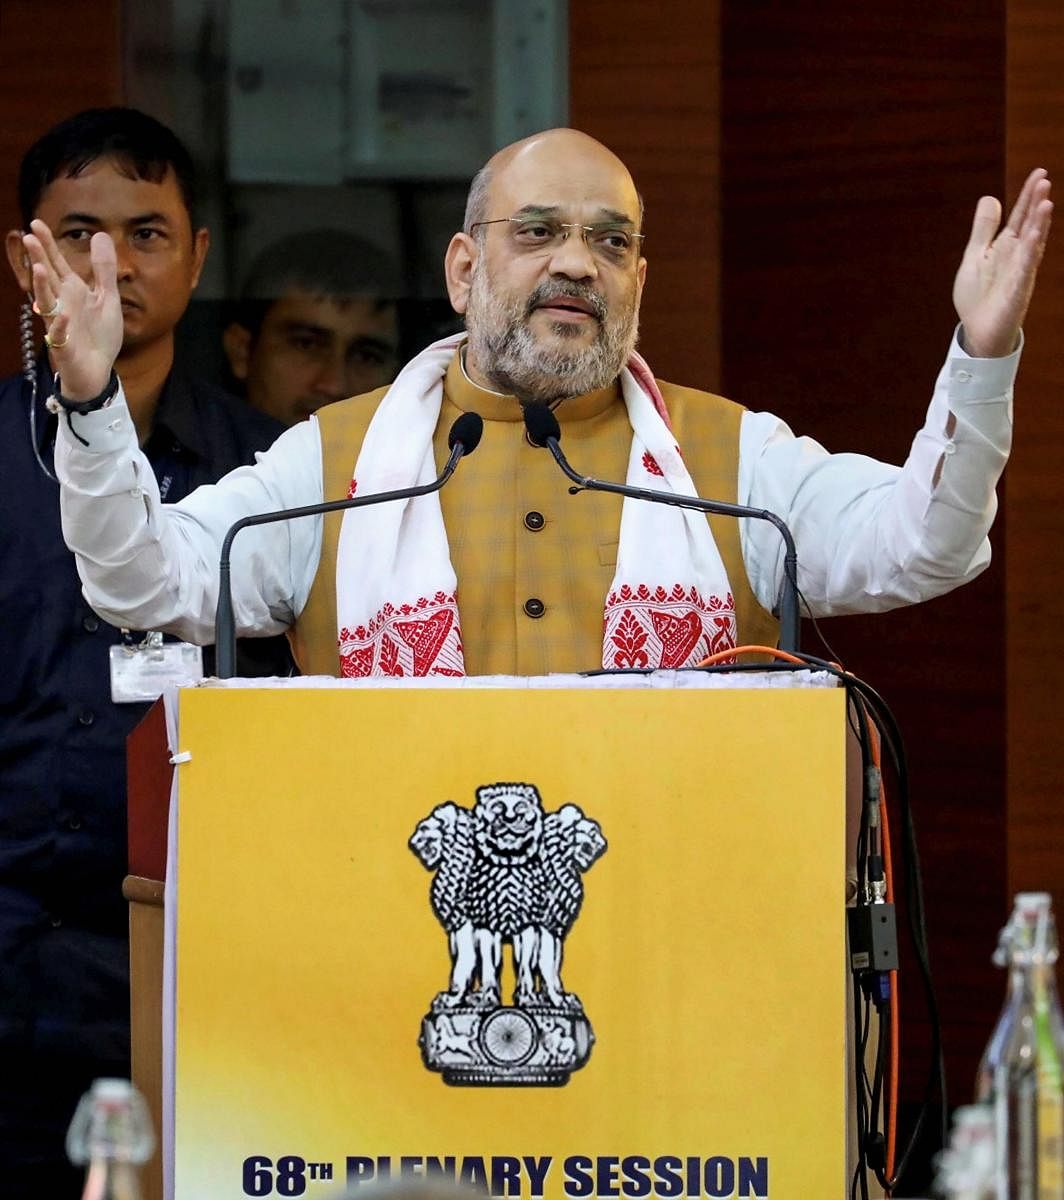 Guwahati: Union Home Minister Amit Shah addresses the 68th Plenary Session of North Eastern Council, at Administrative Staff College, in Guwahati, Sunday, Sept 8, 2019. (PTI Photo)